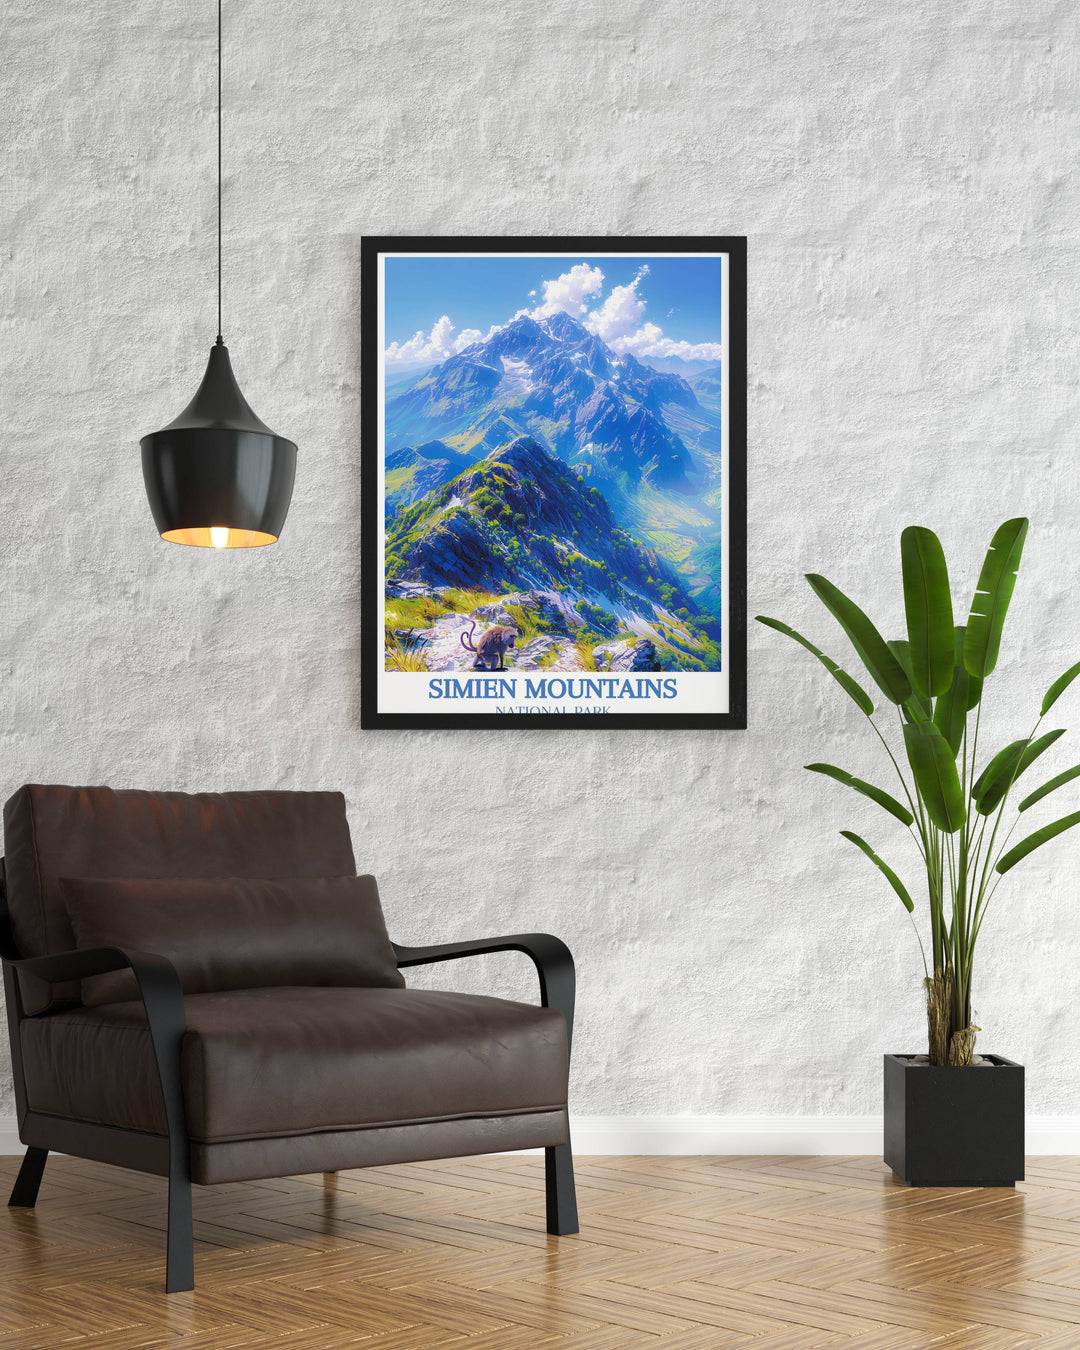 Exclusive wall art of the Semien Mountains blending artistic interpretation with the raw beauty of Ethiopias iconic highlands